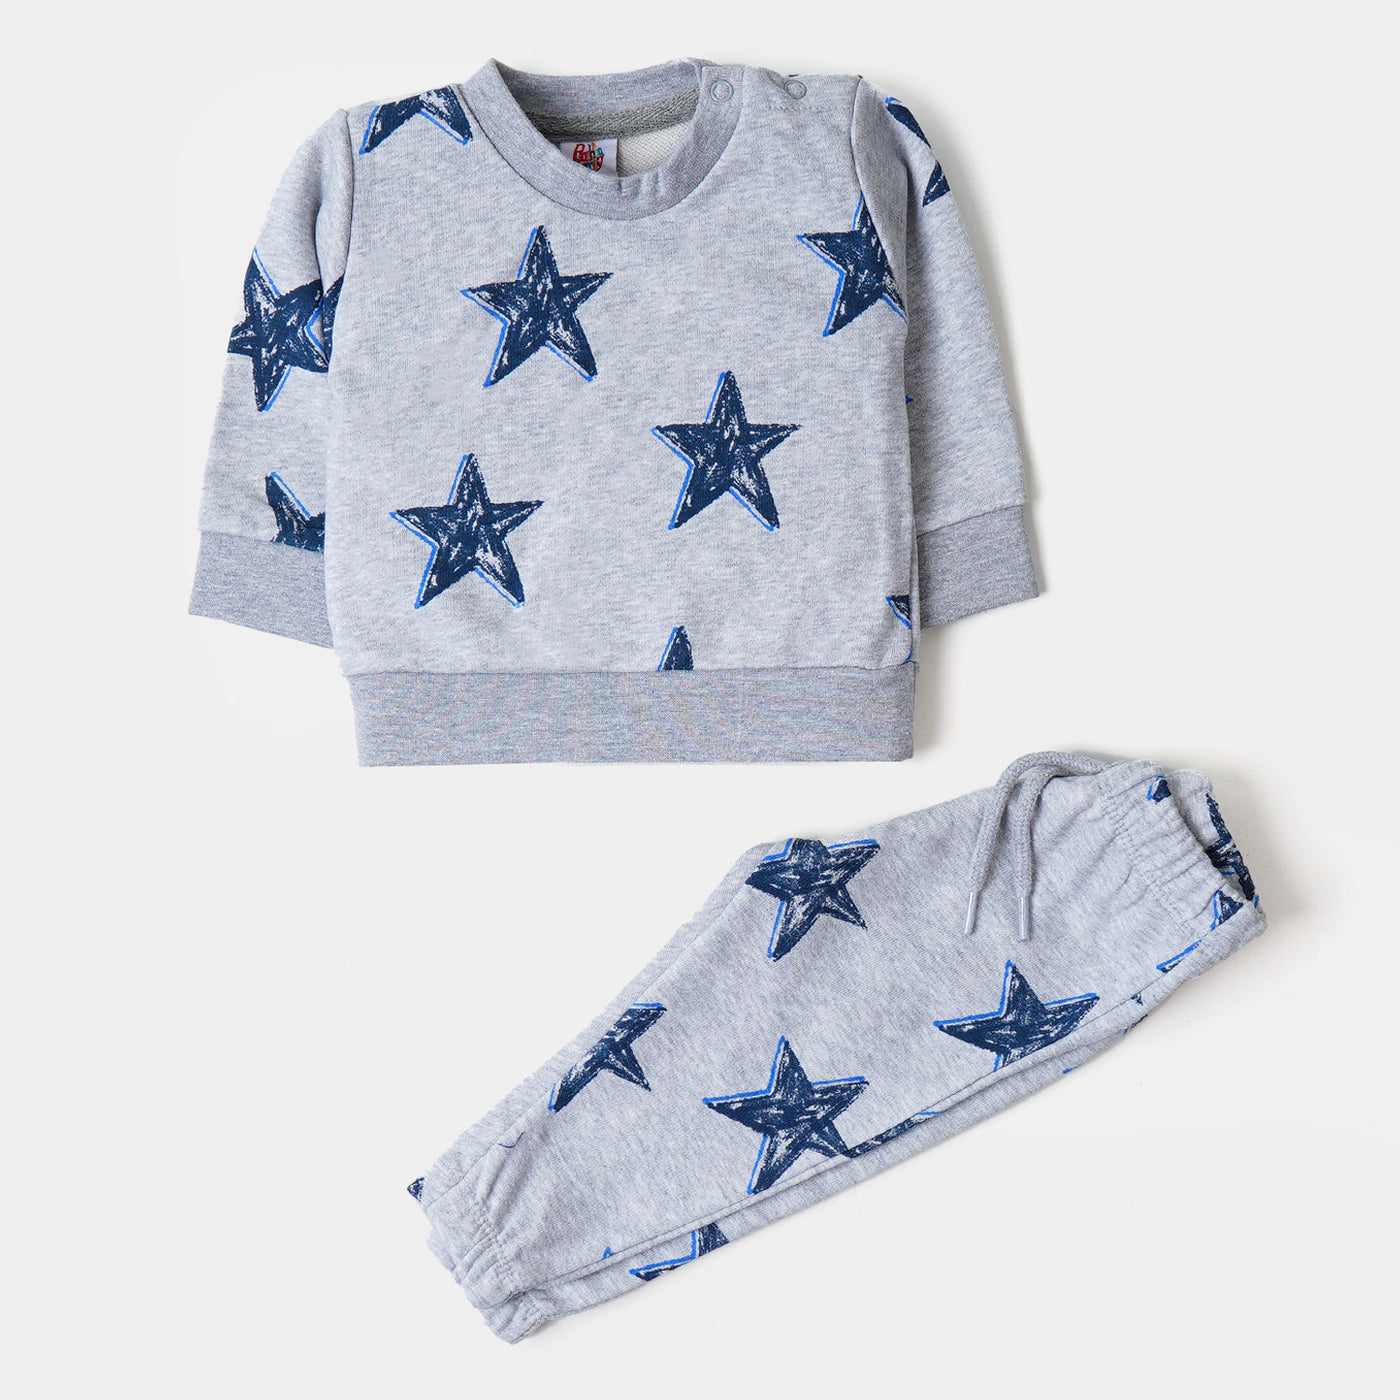 Infant Boys Knitted Suit AOP Star - Gray